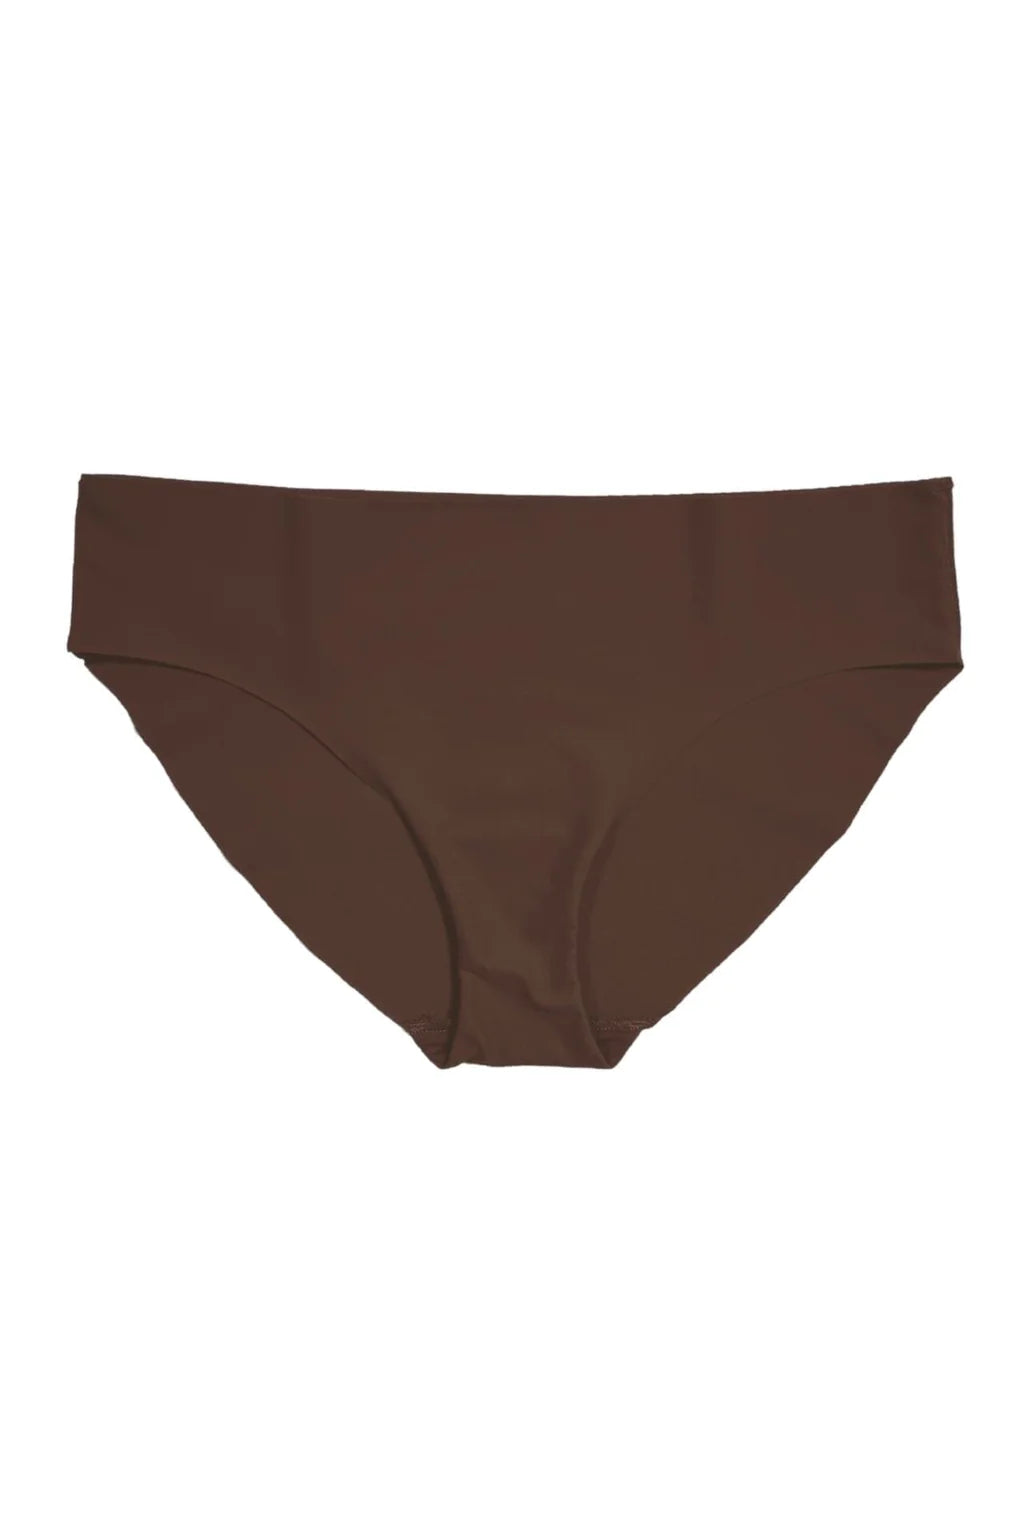 Naked Classic Brief - Cinnamon